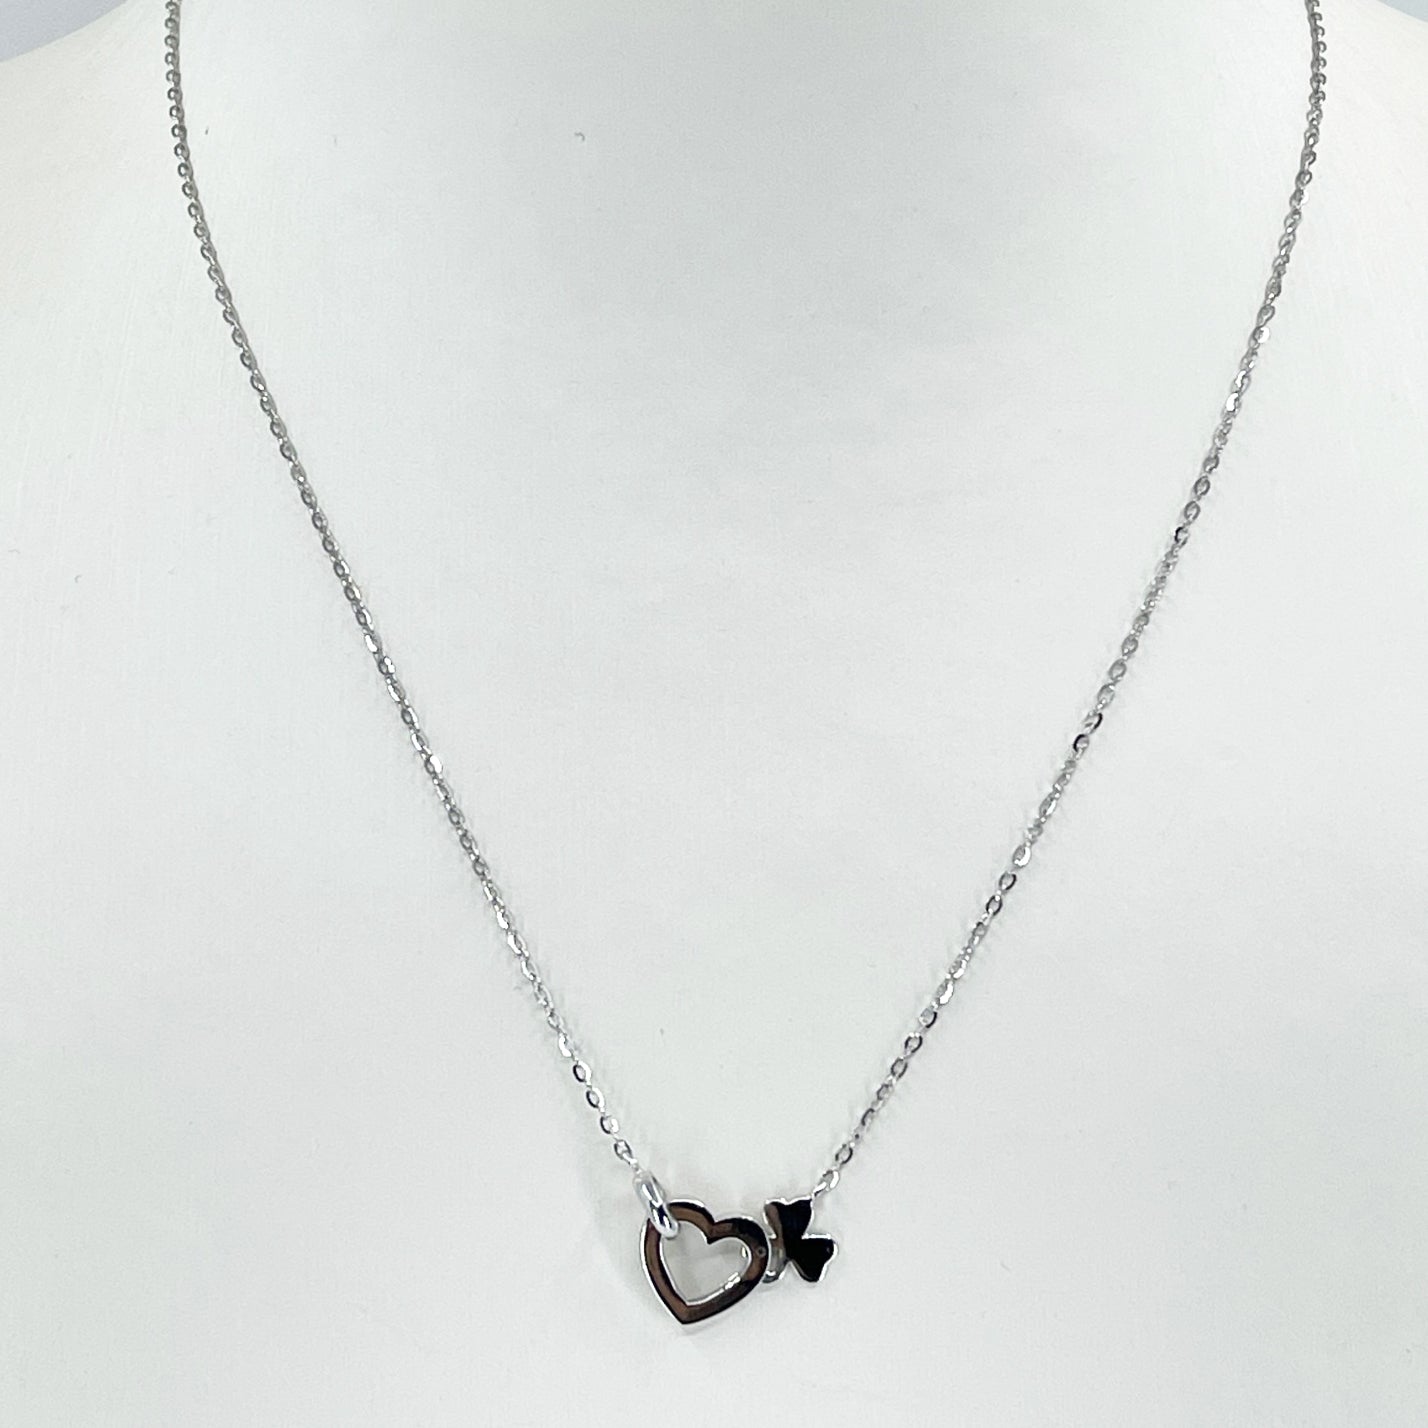 18K Solid White Gold Round Link Chain Necklace with Heart Pendant 16